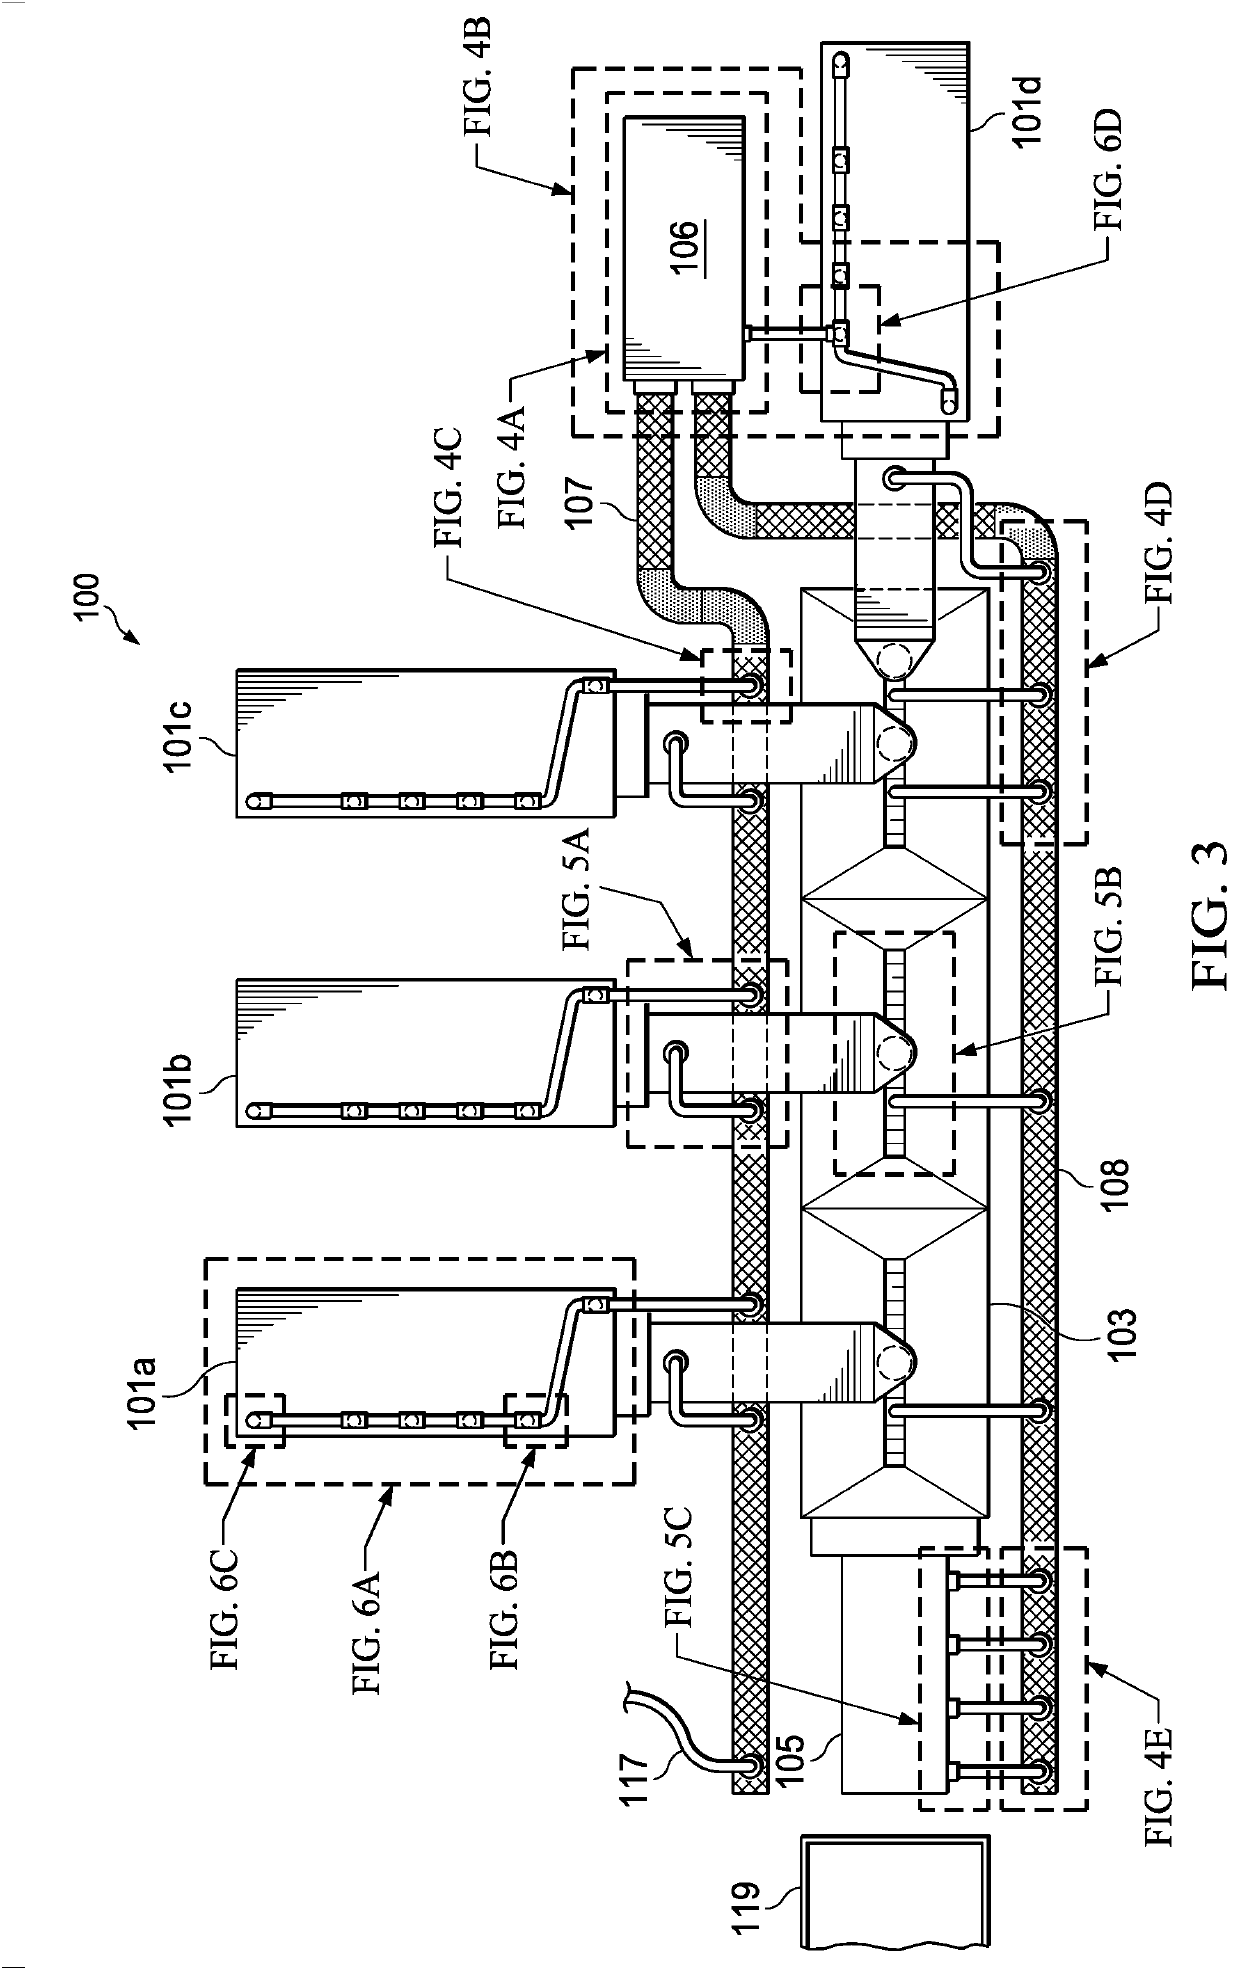 Systems and methods for controlling silica dust during hydraulic fracturing operations using an improved manifold